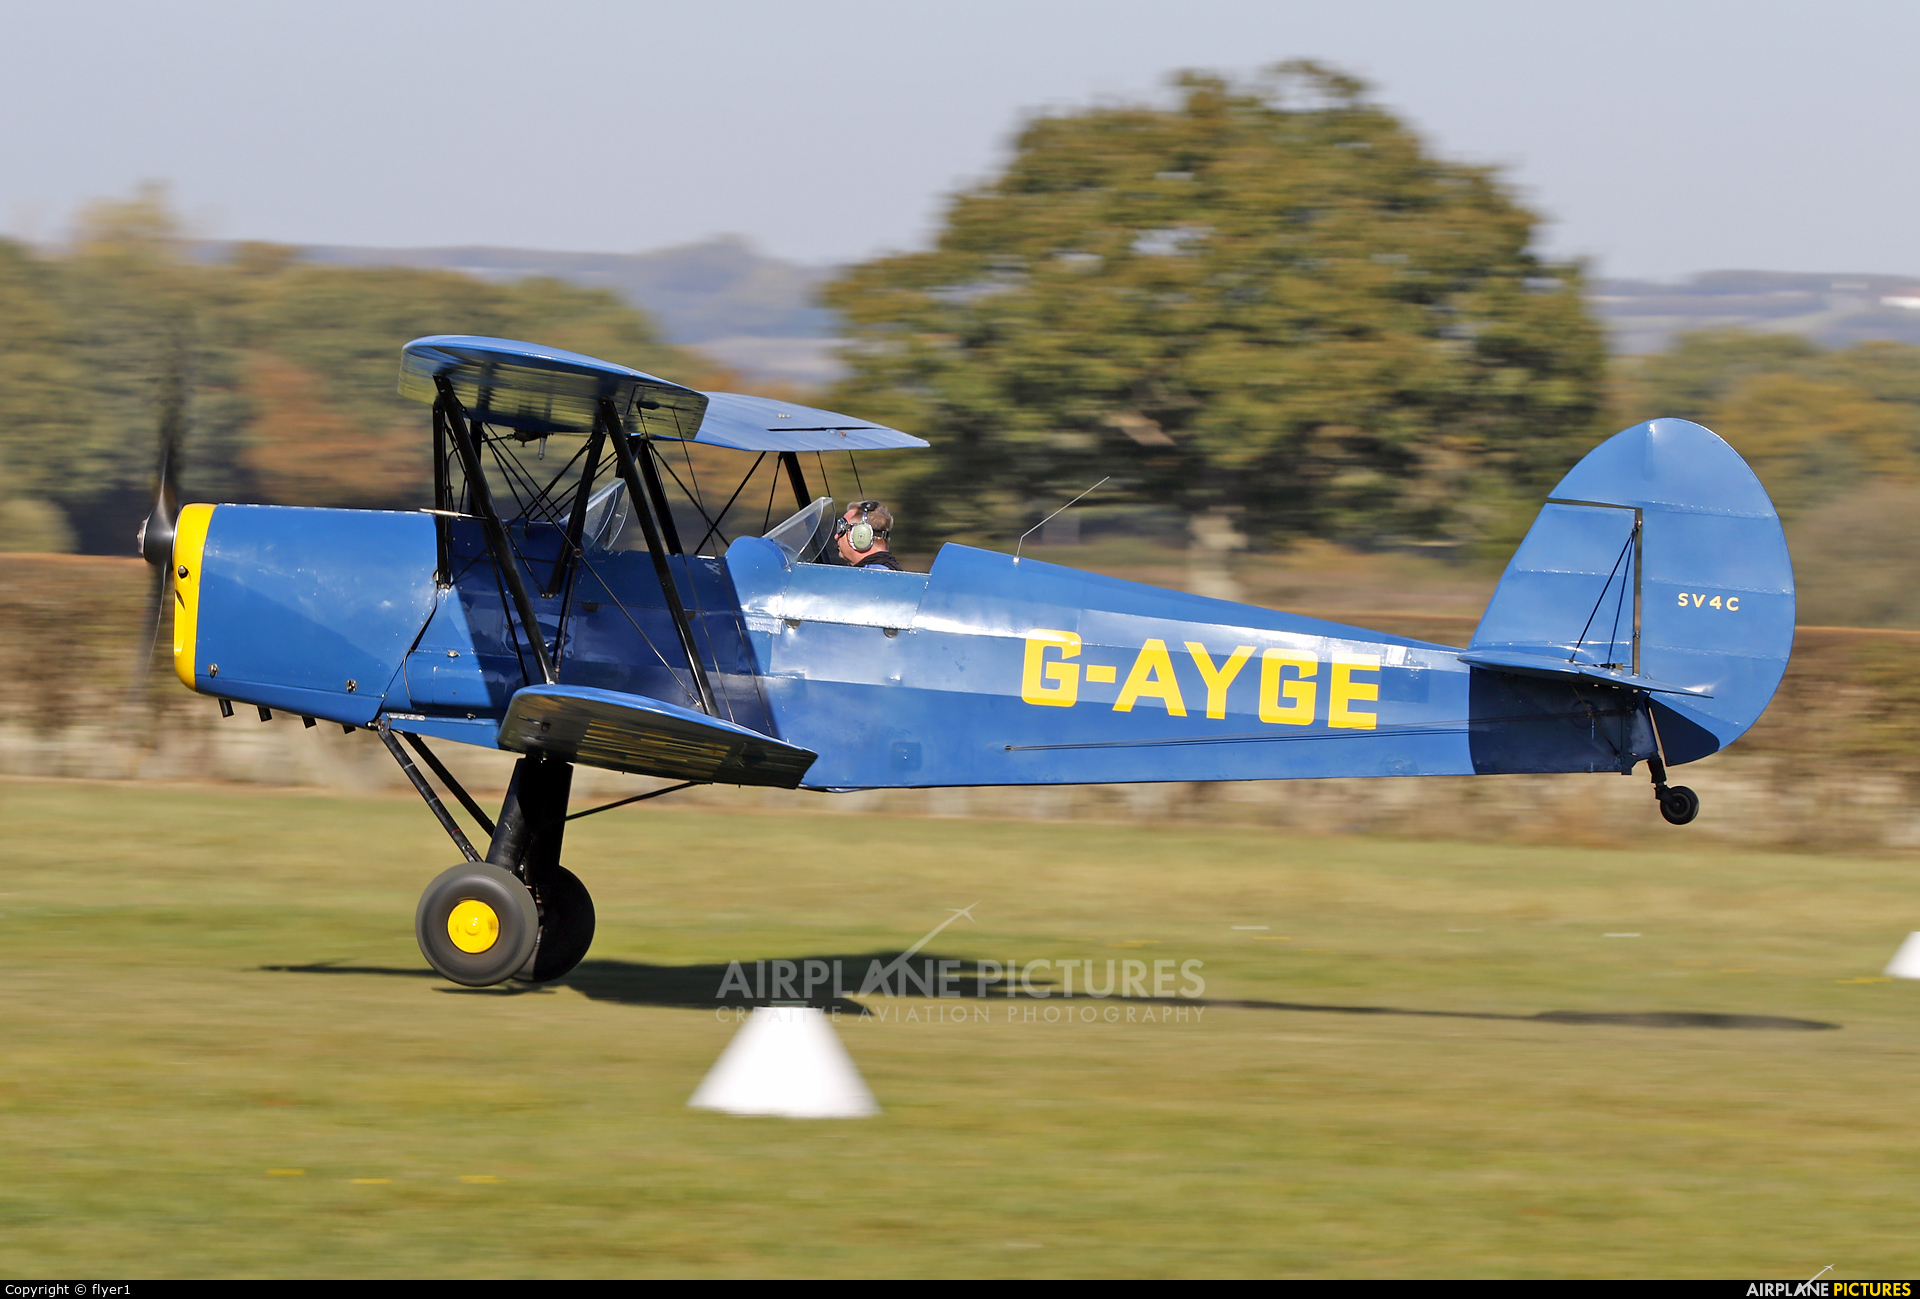 Private G-AYGE aircraft at Lashenden / Headcorn